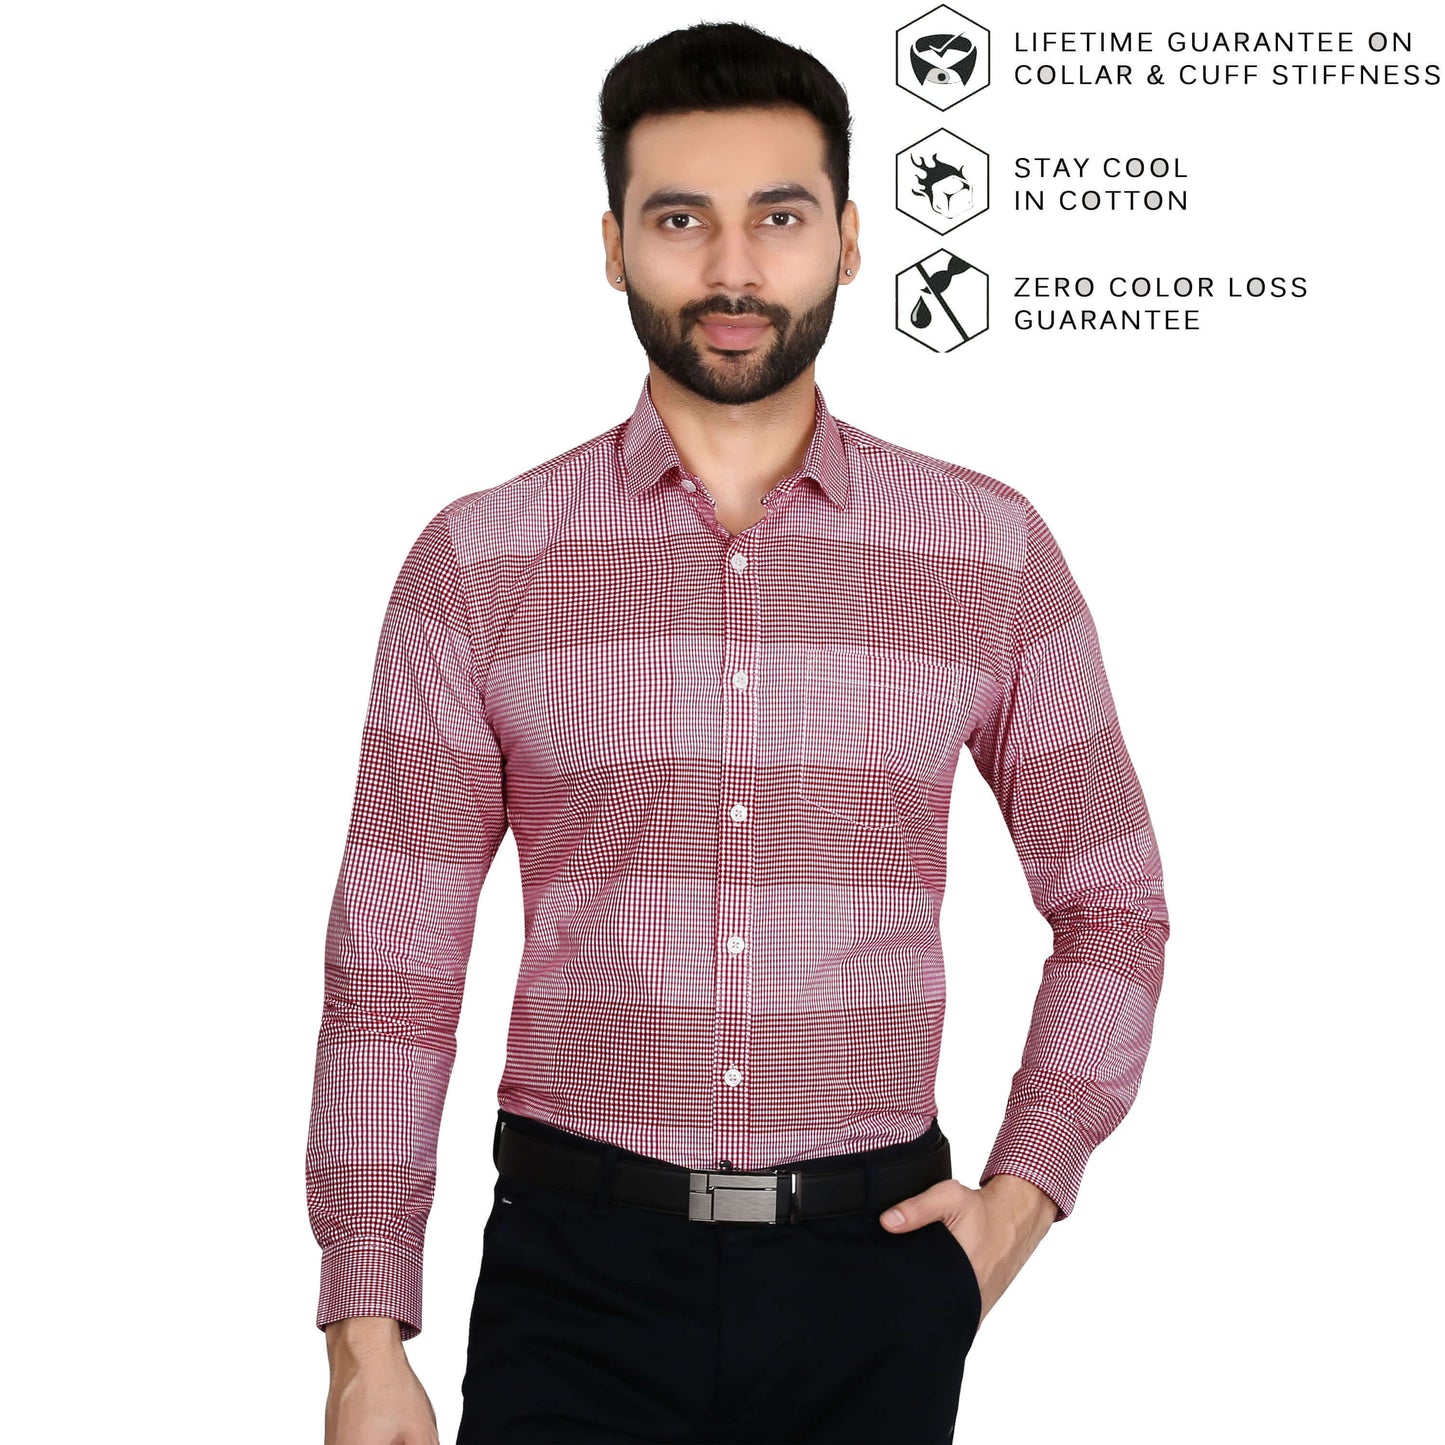 5thanfold Men's Formal Pure Cotton Full Sleeve Checkered Red Regular Fit Shirt